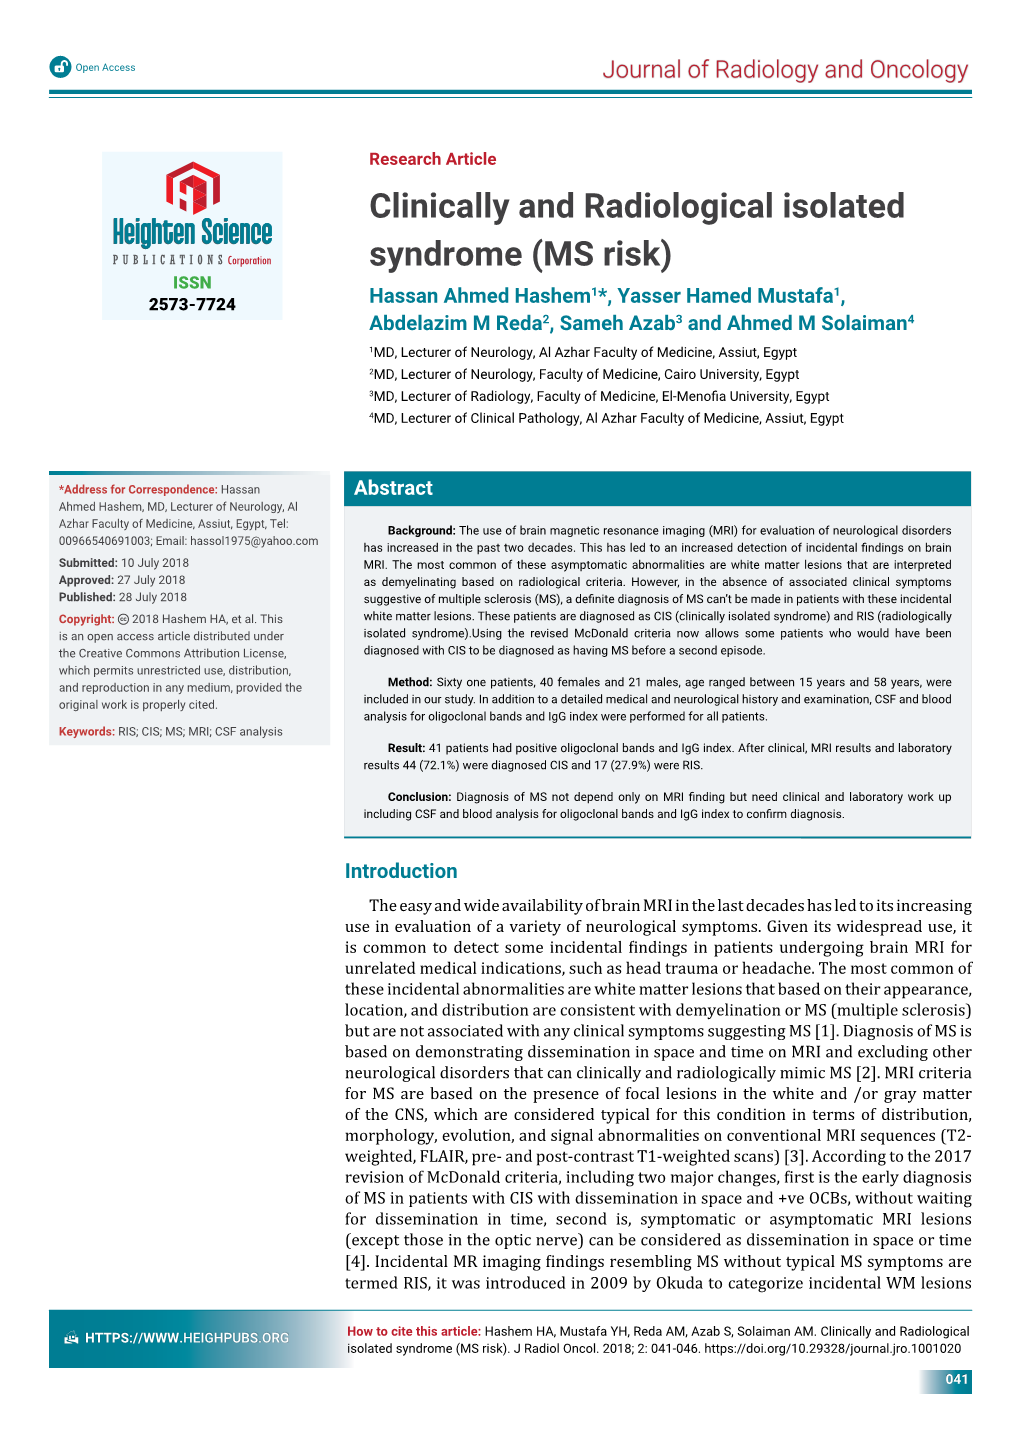 Clinically and Radiological Isolated Syndrome (MS Risk)